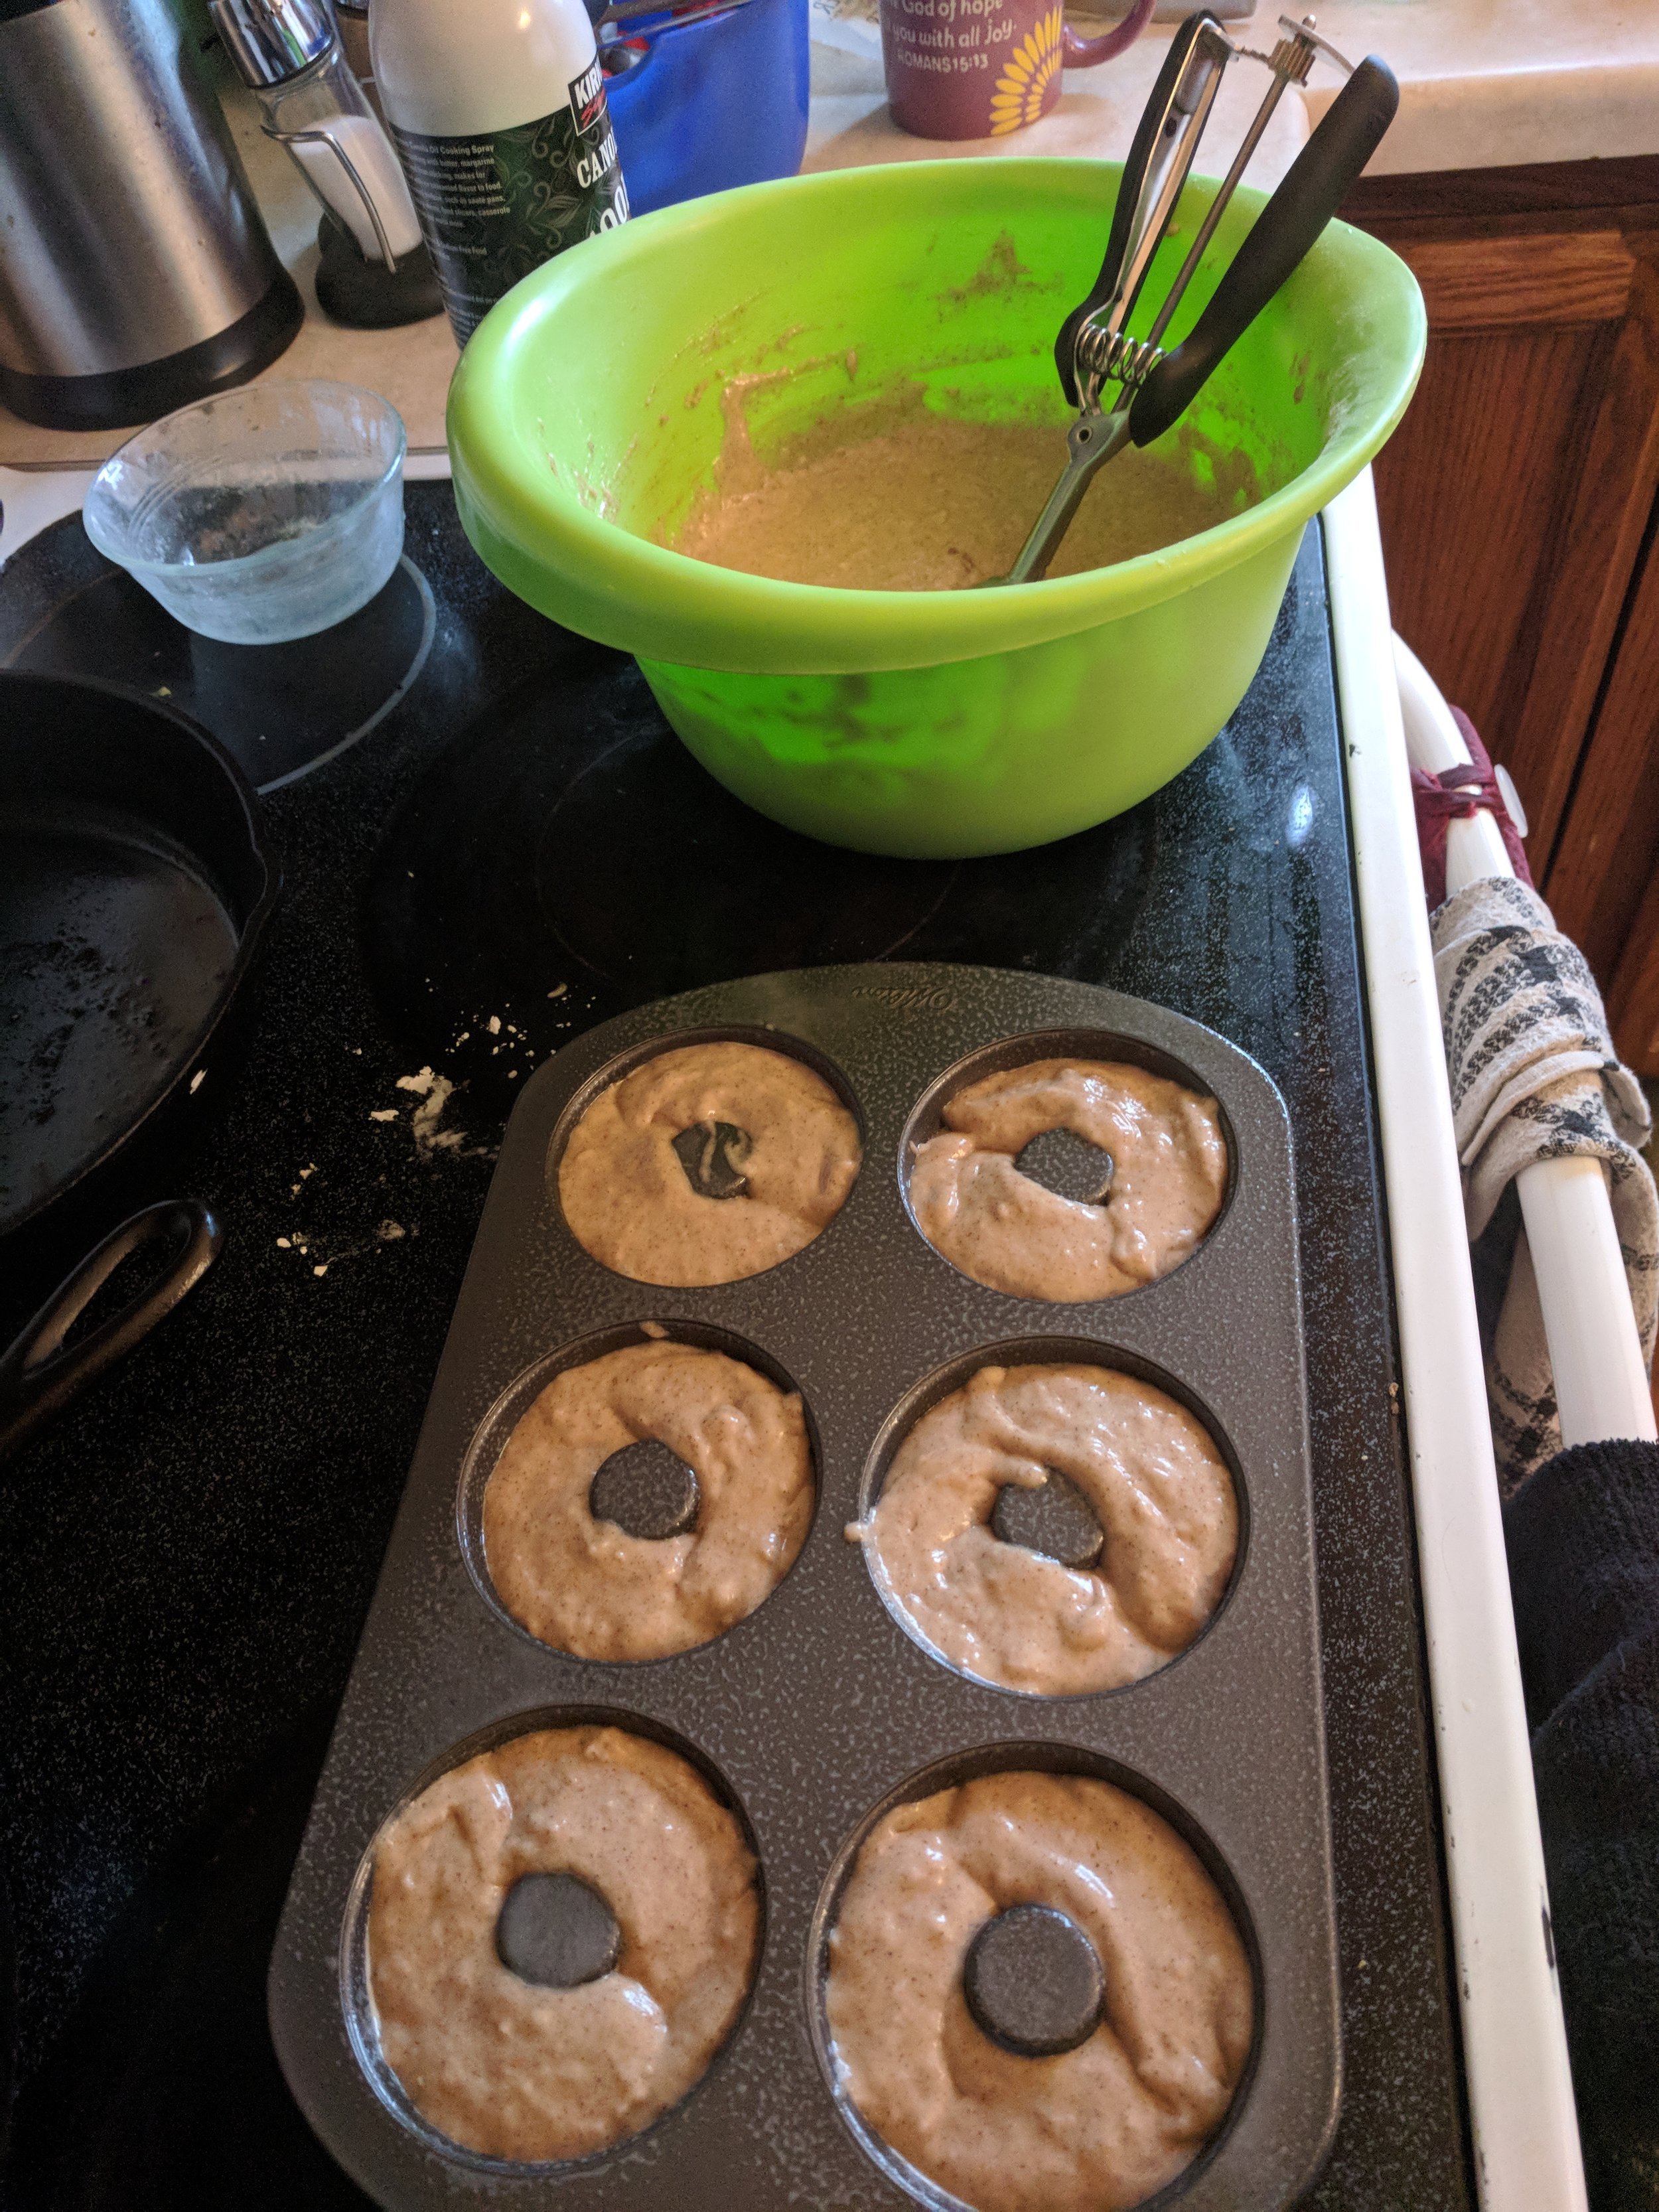  Use a cookie scoop for portioning batter into donut pans 